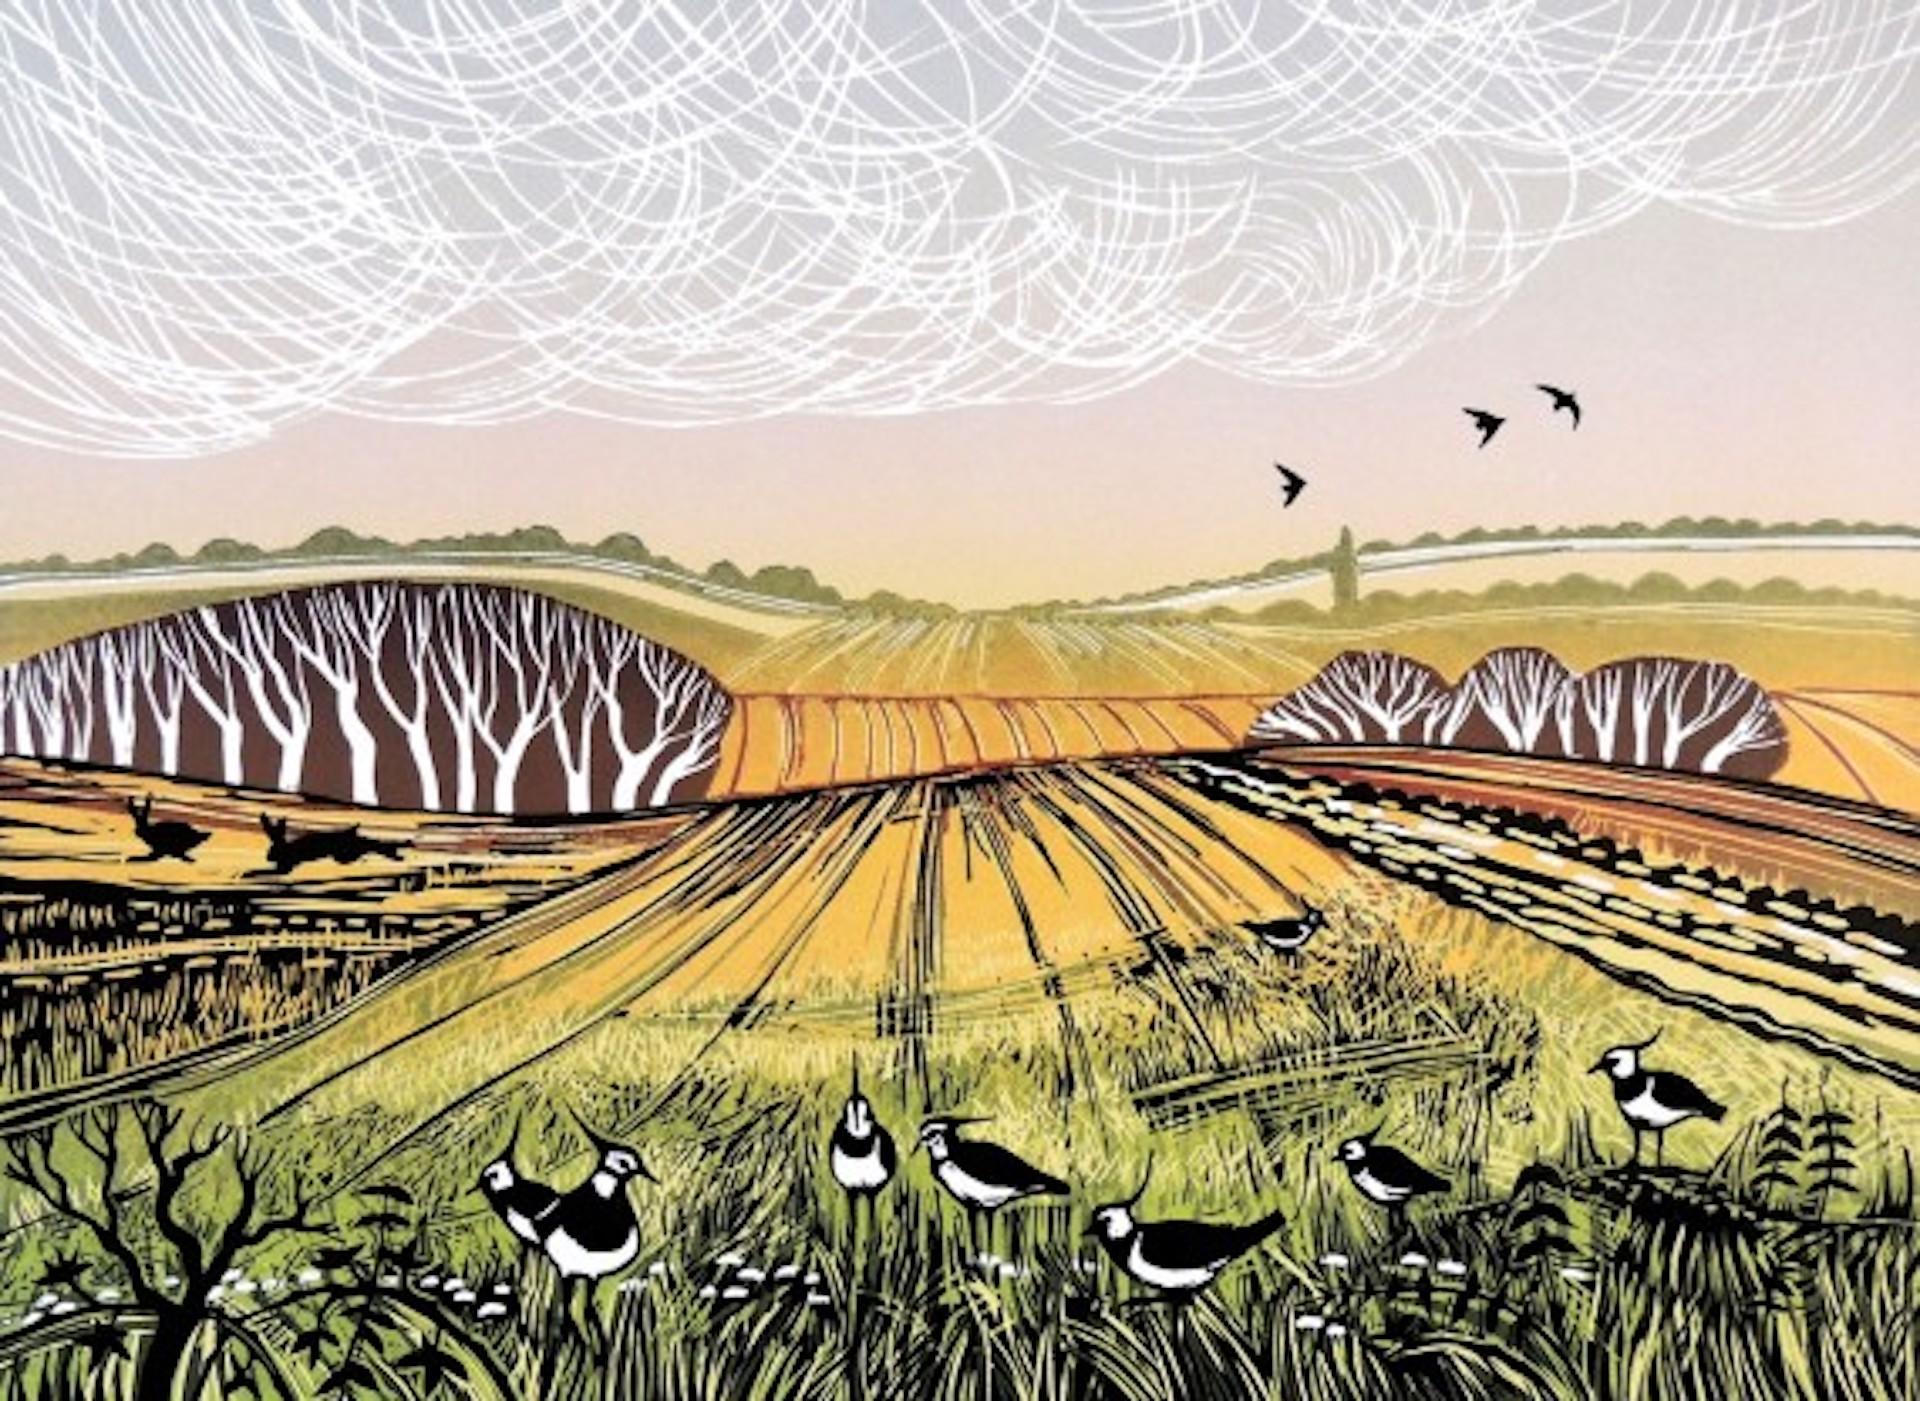 A Fine Day for Lapwings [2021]
limited edition

Linocut

Edition of 50 in edition

Image size: H:30 cm x W:44 cm

Complete Size of Unframed Work: H:49 cm x W:61 cm x D:0.02cm

Sold Unframed

Please note that insitu images are purely an indication of